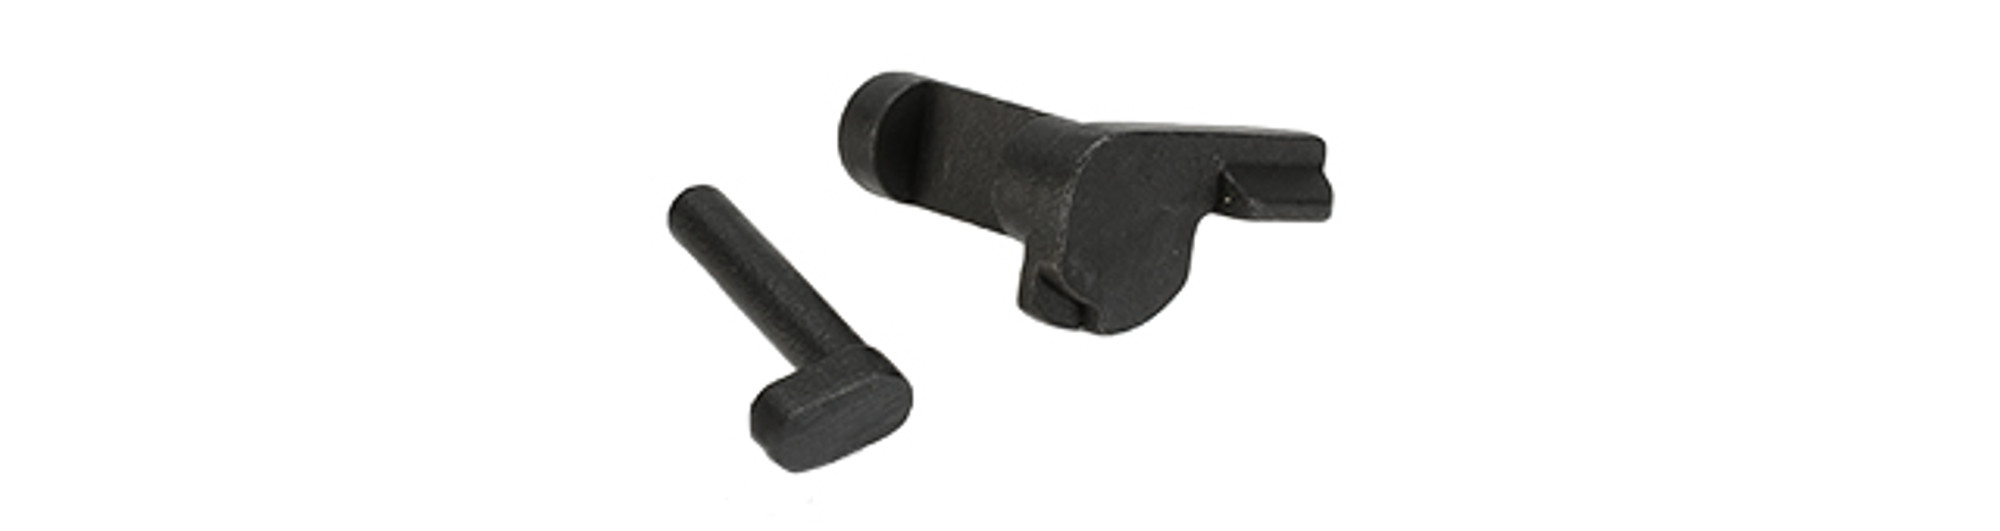 RA-Tech NewAge Takedown Lever for KWA M9 Series Airsoft GBB Pistols